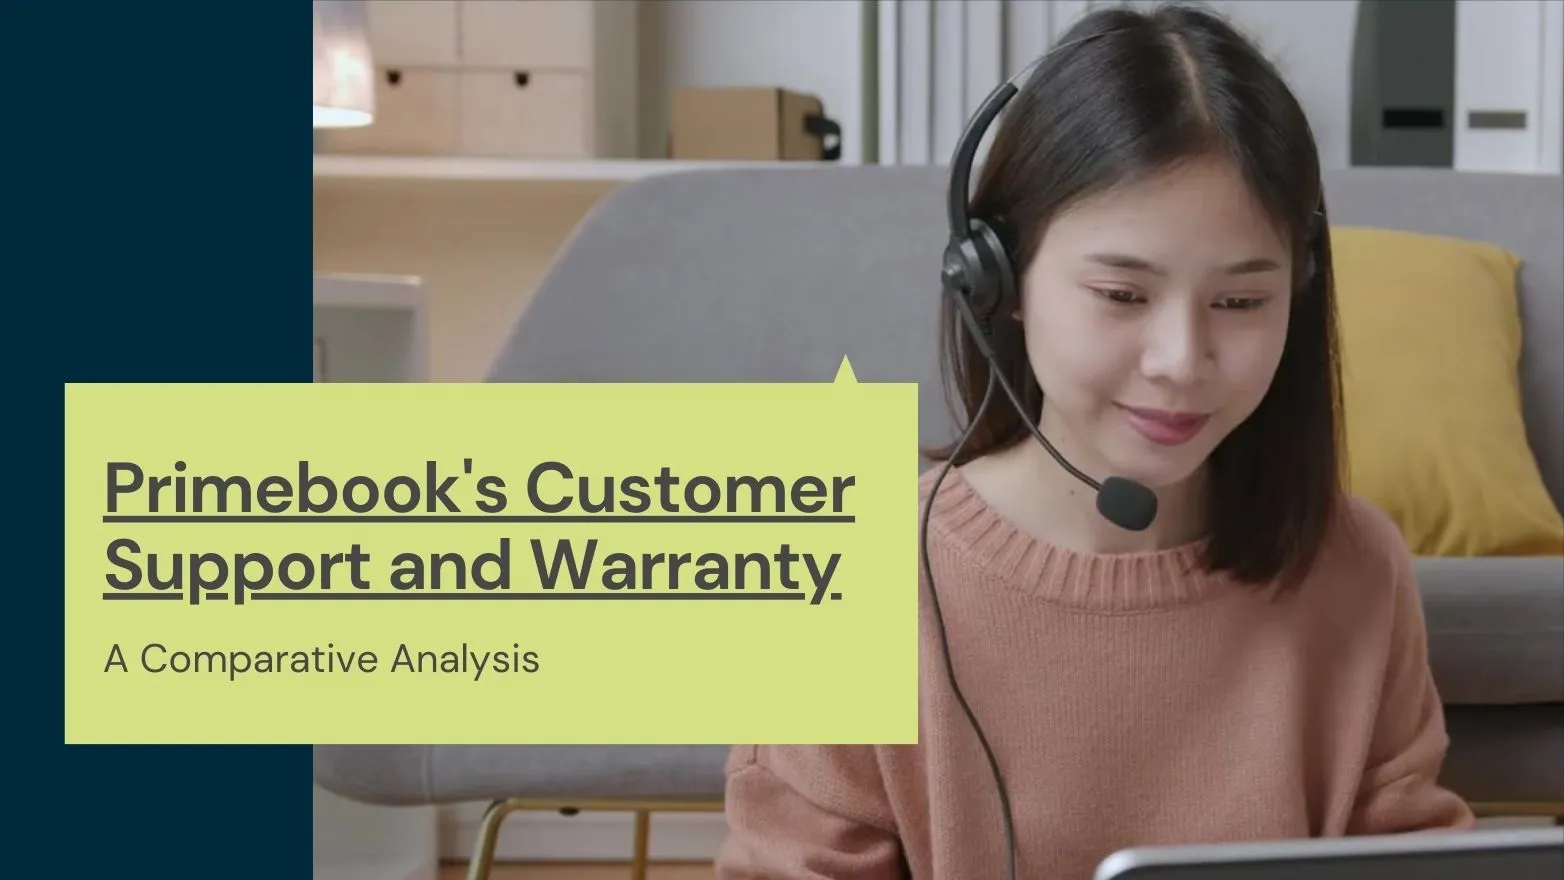 Primebook's Customer Support and Warranty: A Comparative Analysis